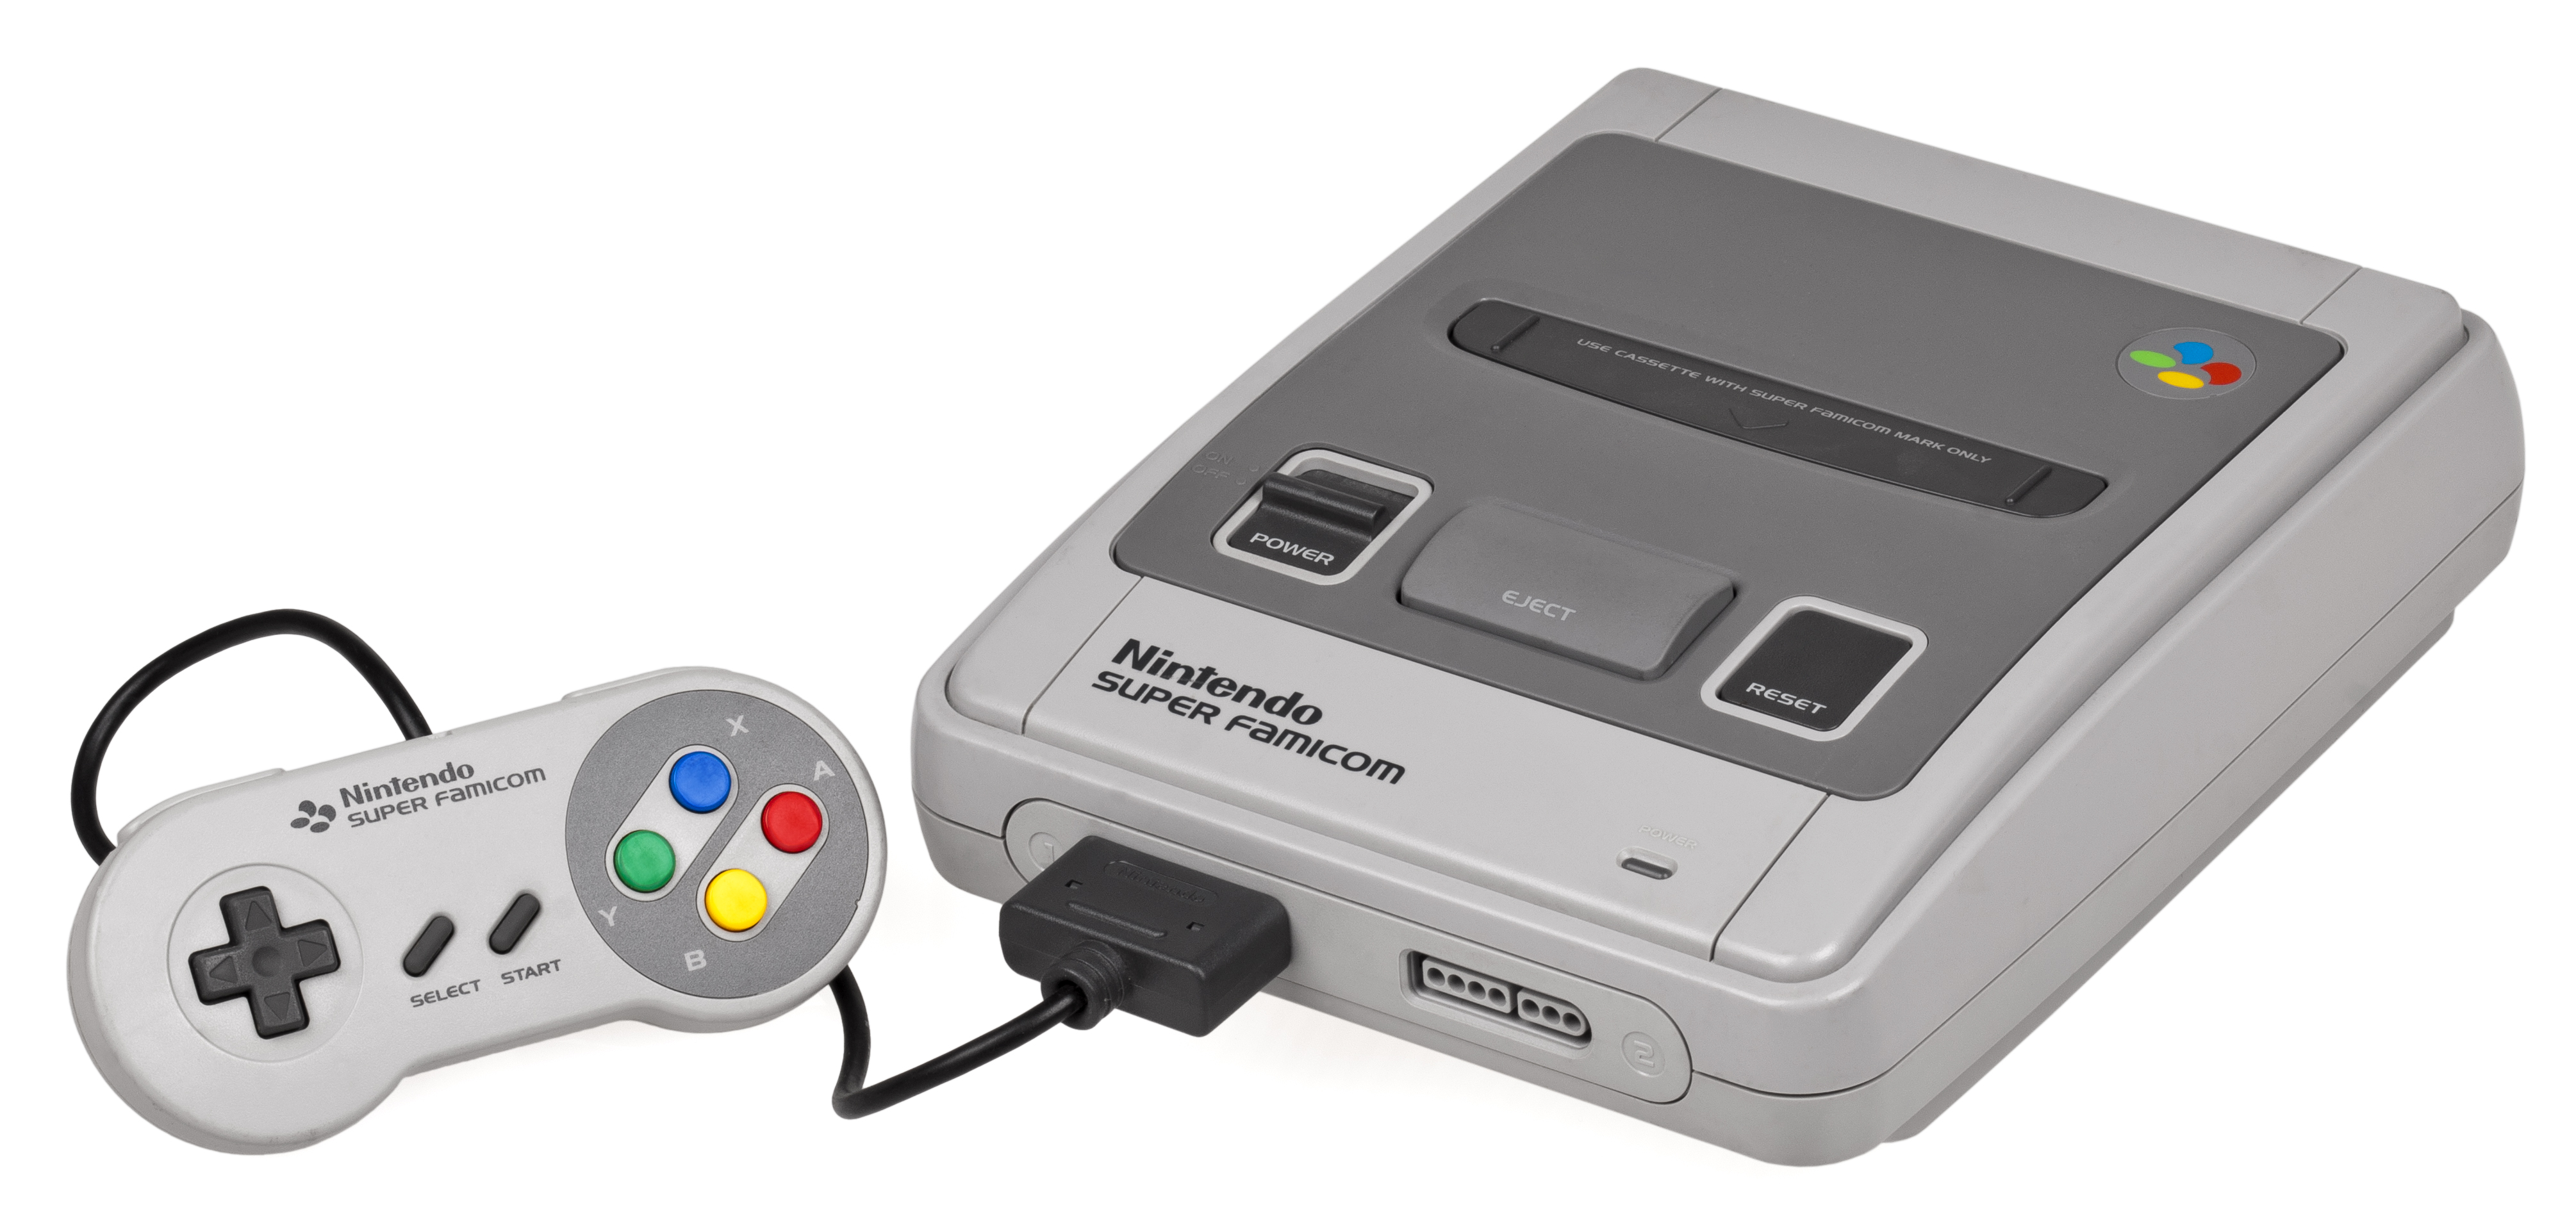 SNES games coming to New Nintendo 3DS console